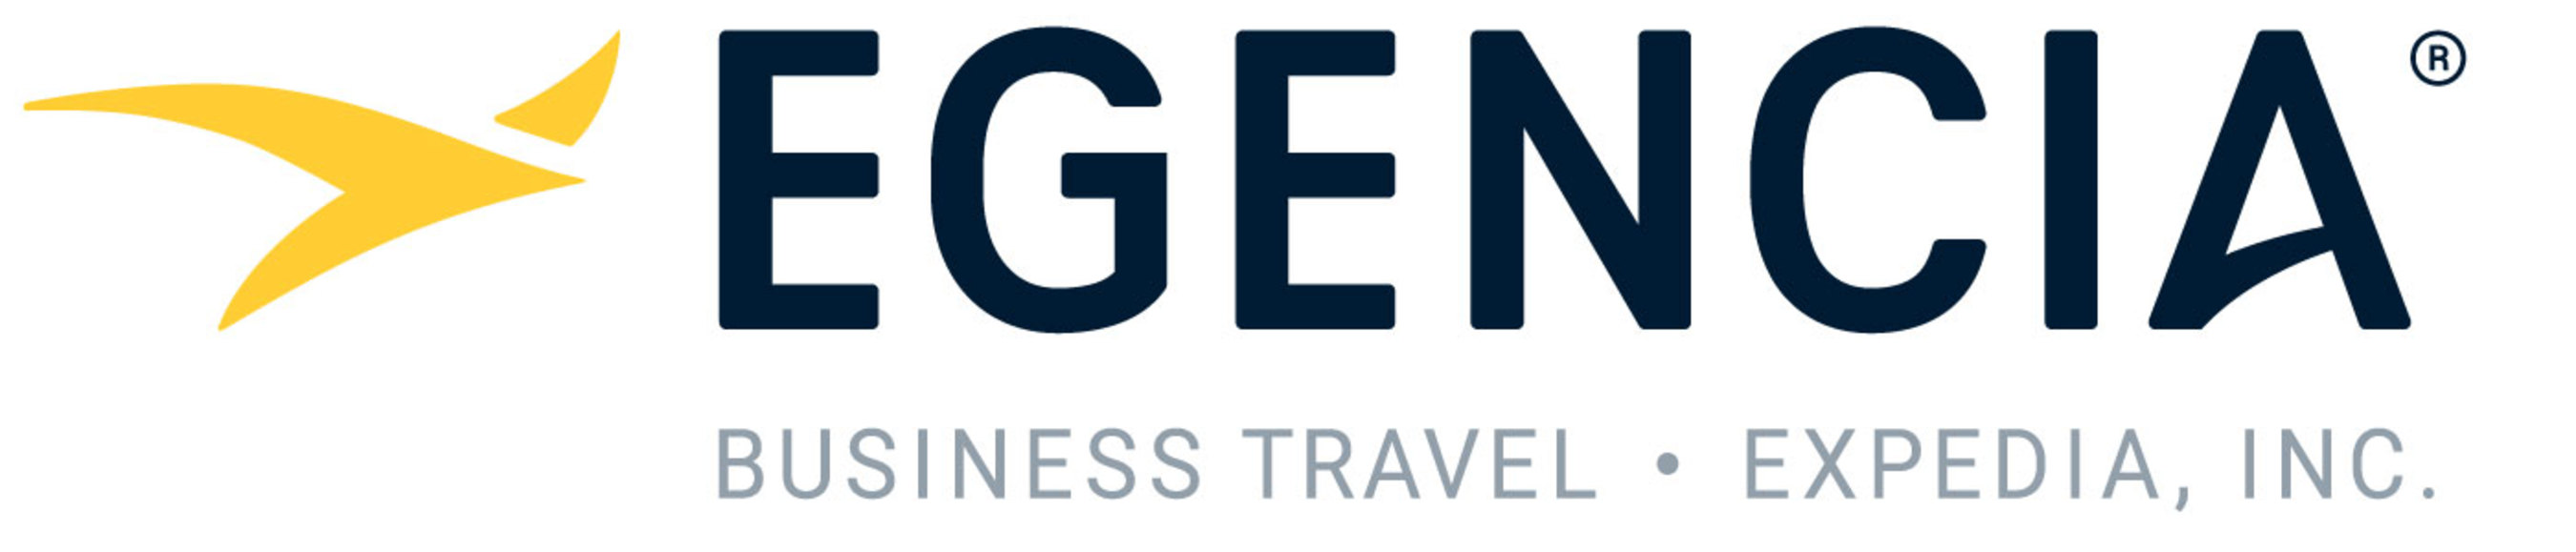 Egencia has successfully brought the technology heritage, relentless focus on user experience and innovative spirit of its parent company Expedia, Inc. into the enterprise. In 2013, Egencia launched its new app, Egencia TripNavigator, which dramatically improves the in-trip experience for business travelers. The app provides step-by-step navigation and offers integrated access to Egencia Travel Consultants. Today, 10,000 companies worldwide partner with Egencia to drive travel compliance and cost savings. (PRNewsFoto/Egencia, an Expedia, Inc. Company) (PRNewsFoto/) (PRNewsFoto/)